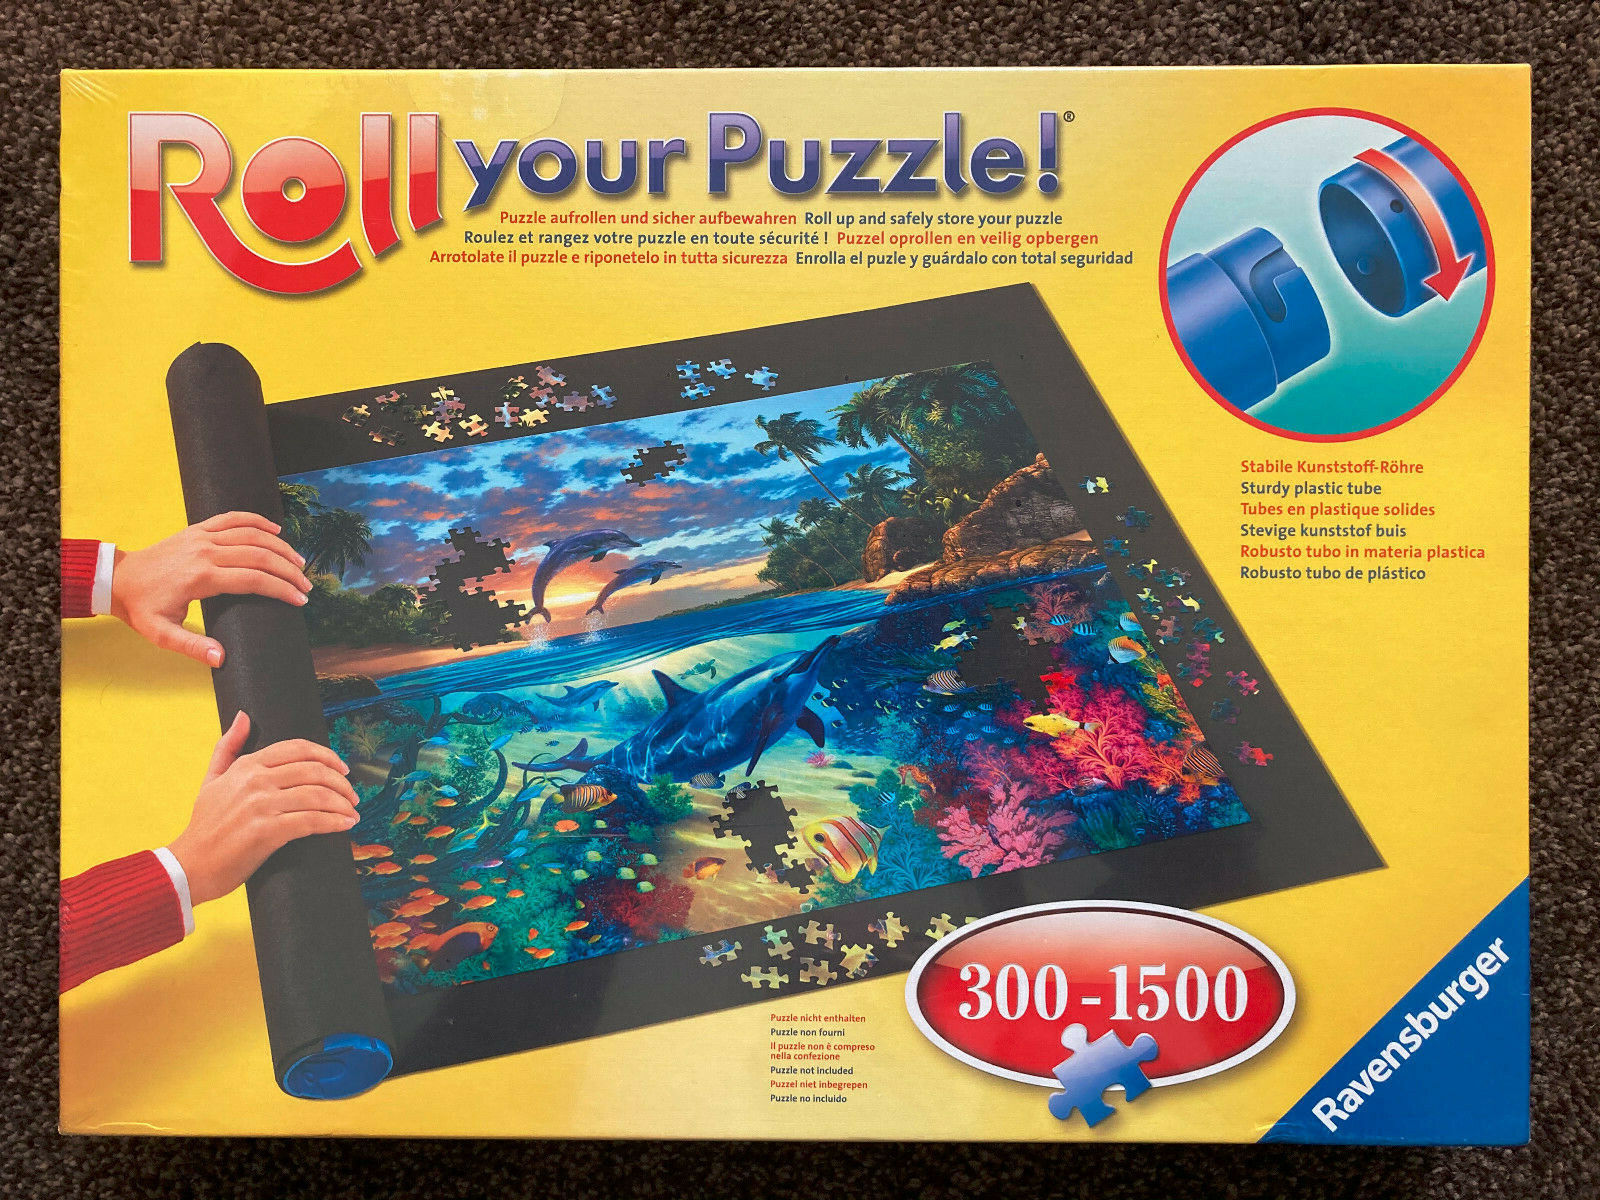 New!! Ravensburger Roll Your Puzzle 300-1500 Piece Jigsaw Storage Mat